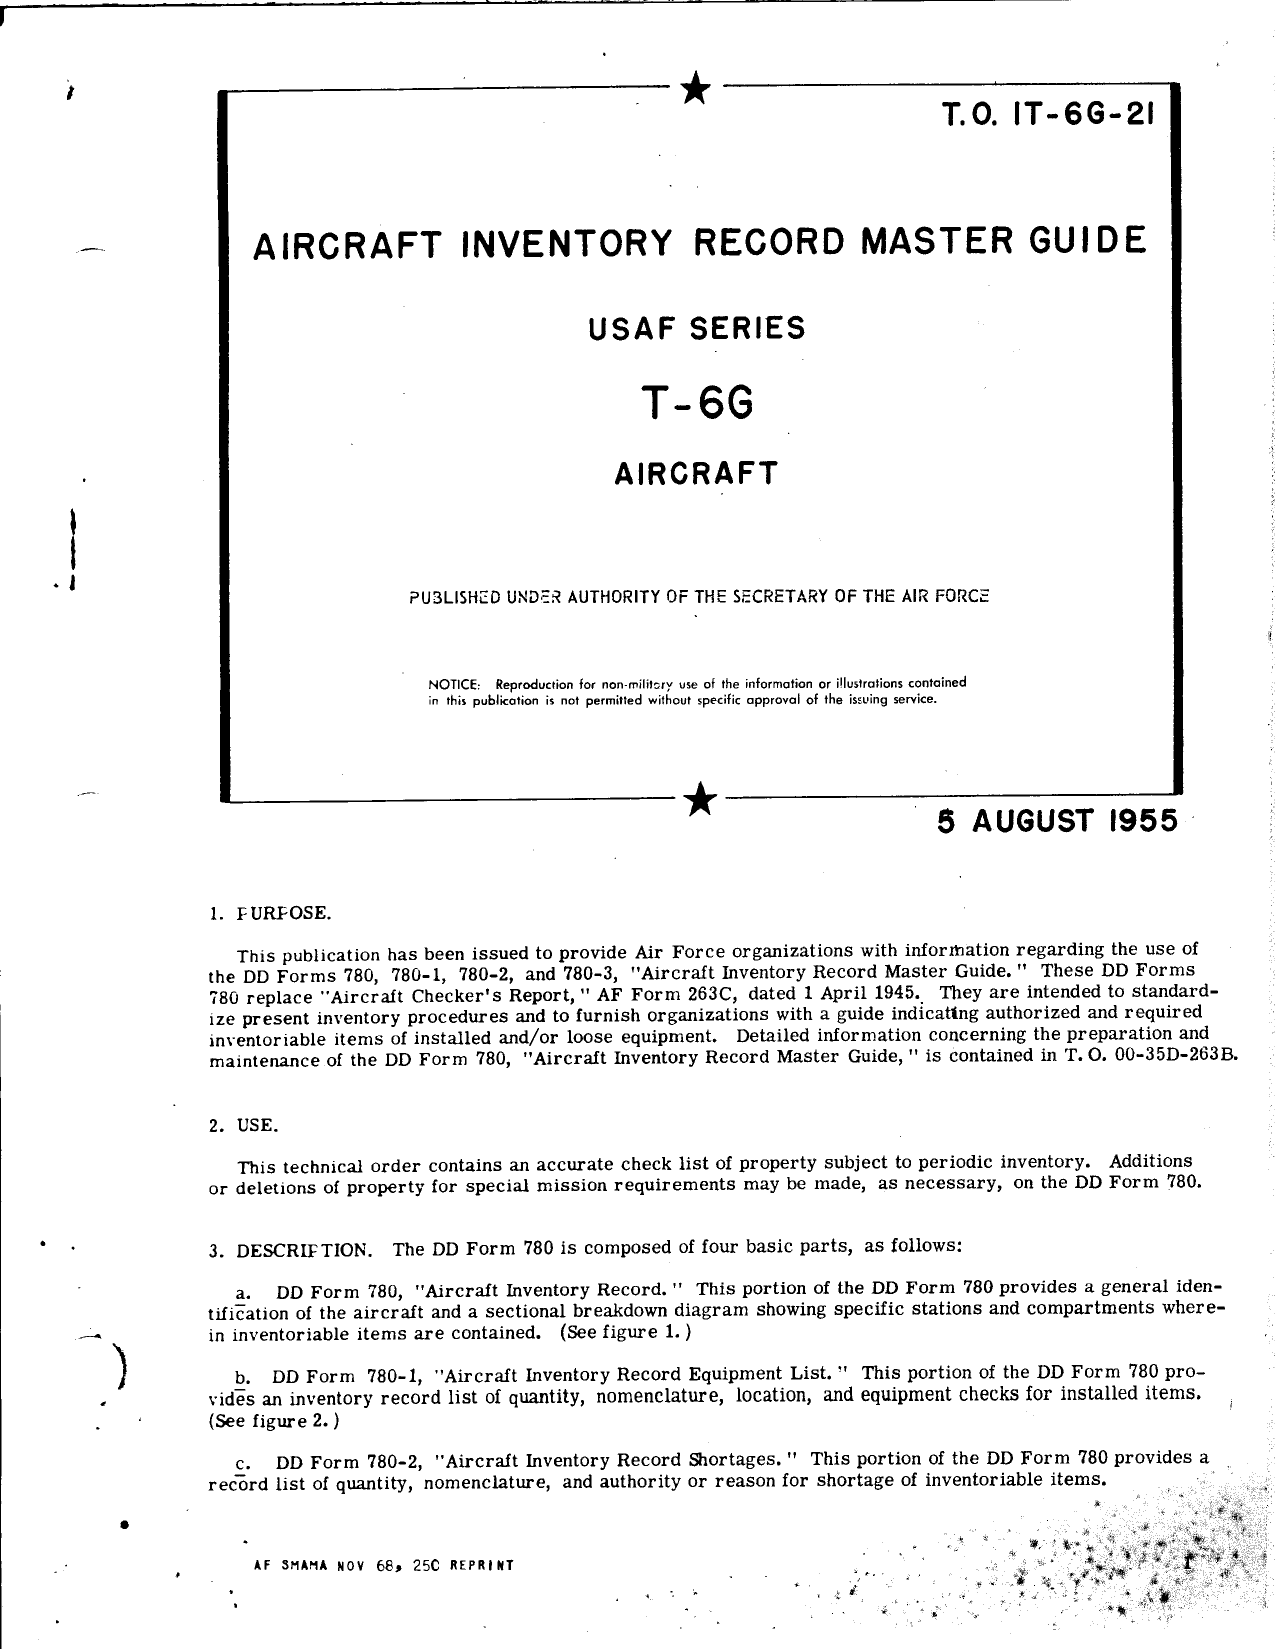 Sample page 1 from AirCorps Library document: Aircraft Inventory Record Master Guide for T-6G Aircraft